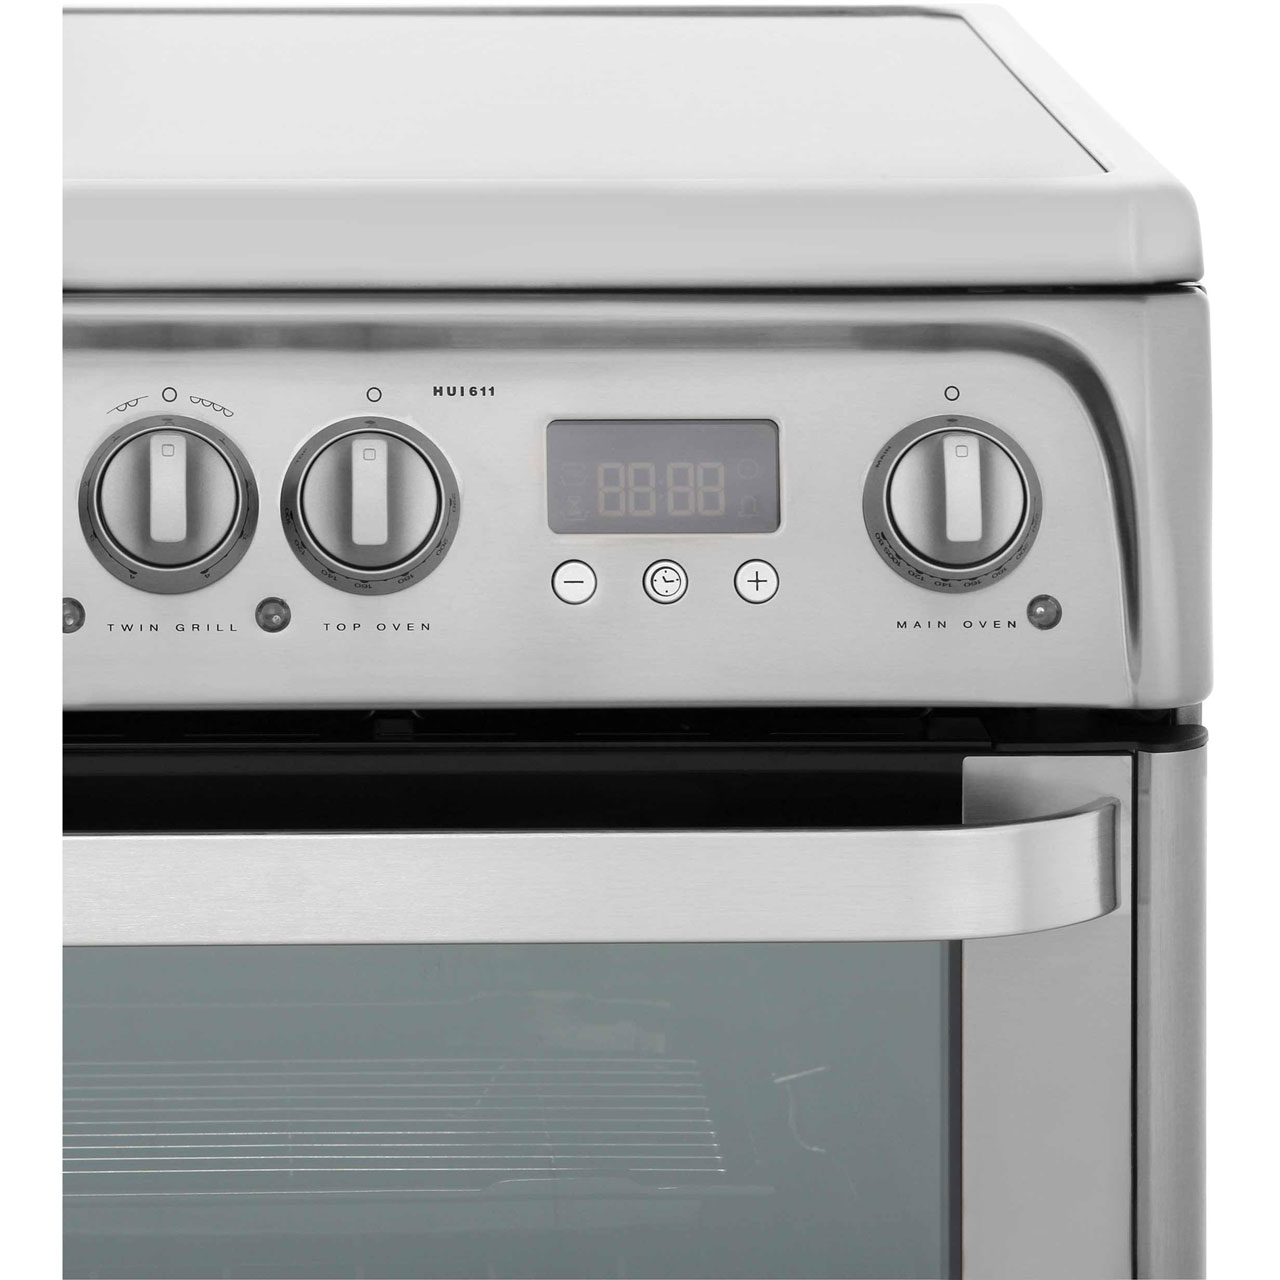 Hotpoint HUI611X Ultima Free Standing A/A Electric Cooker 